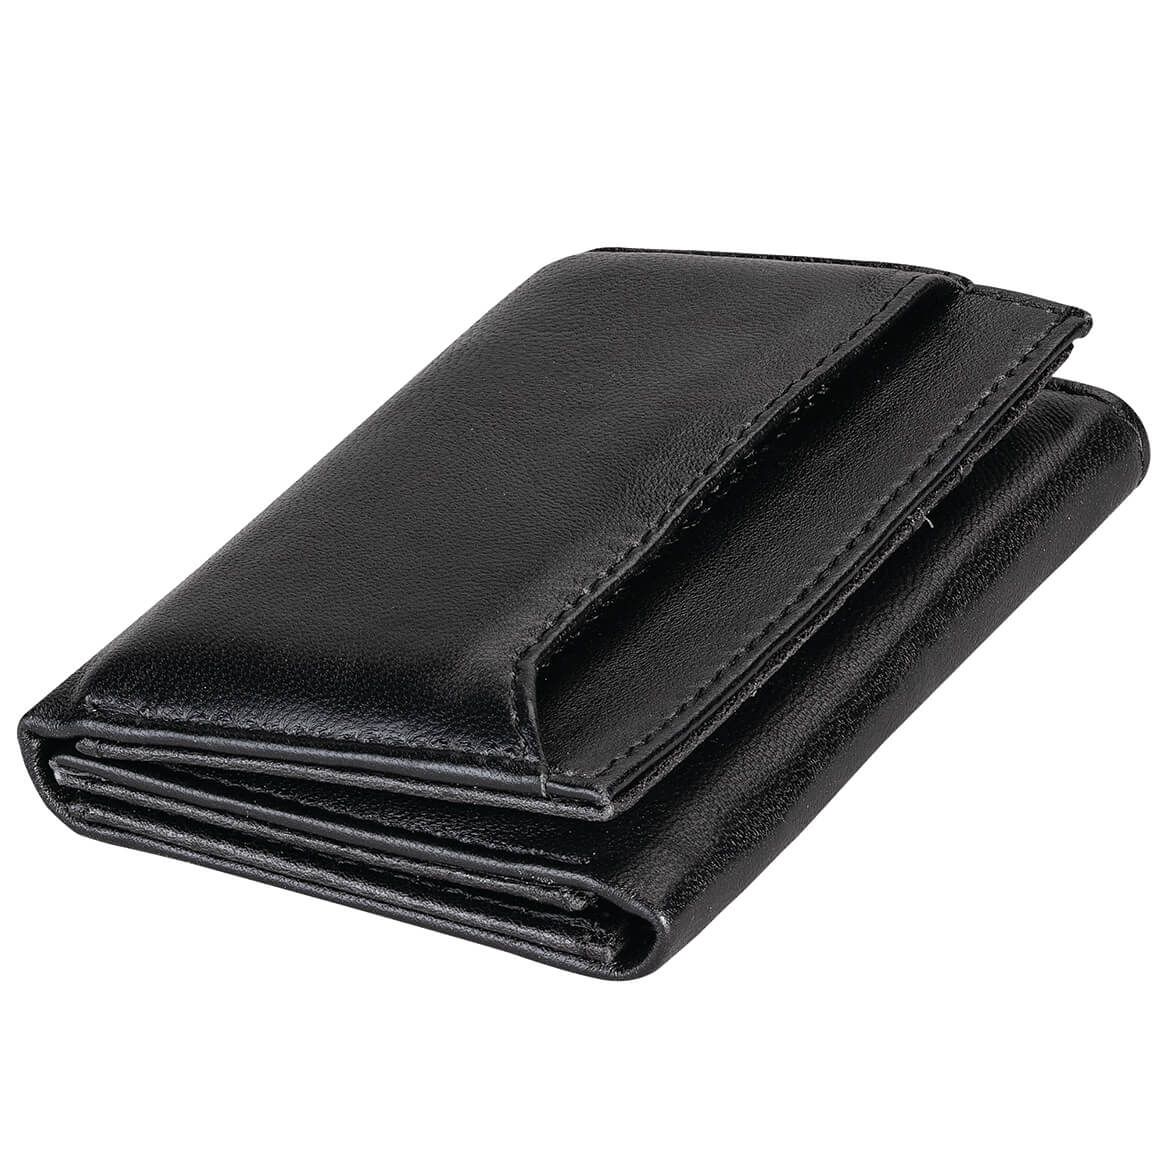 Geniune Leather RFID Trifold Wallet + '-' + 372783